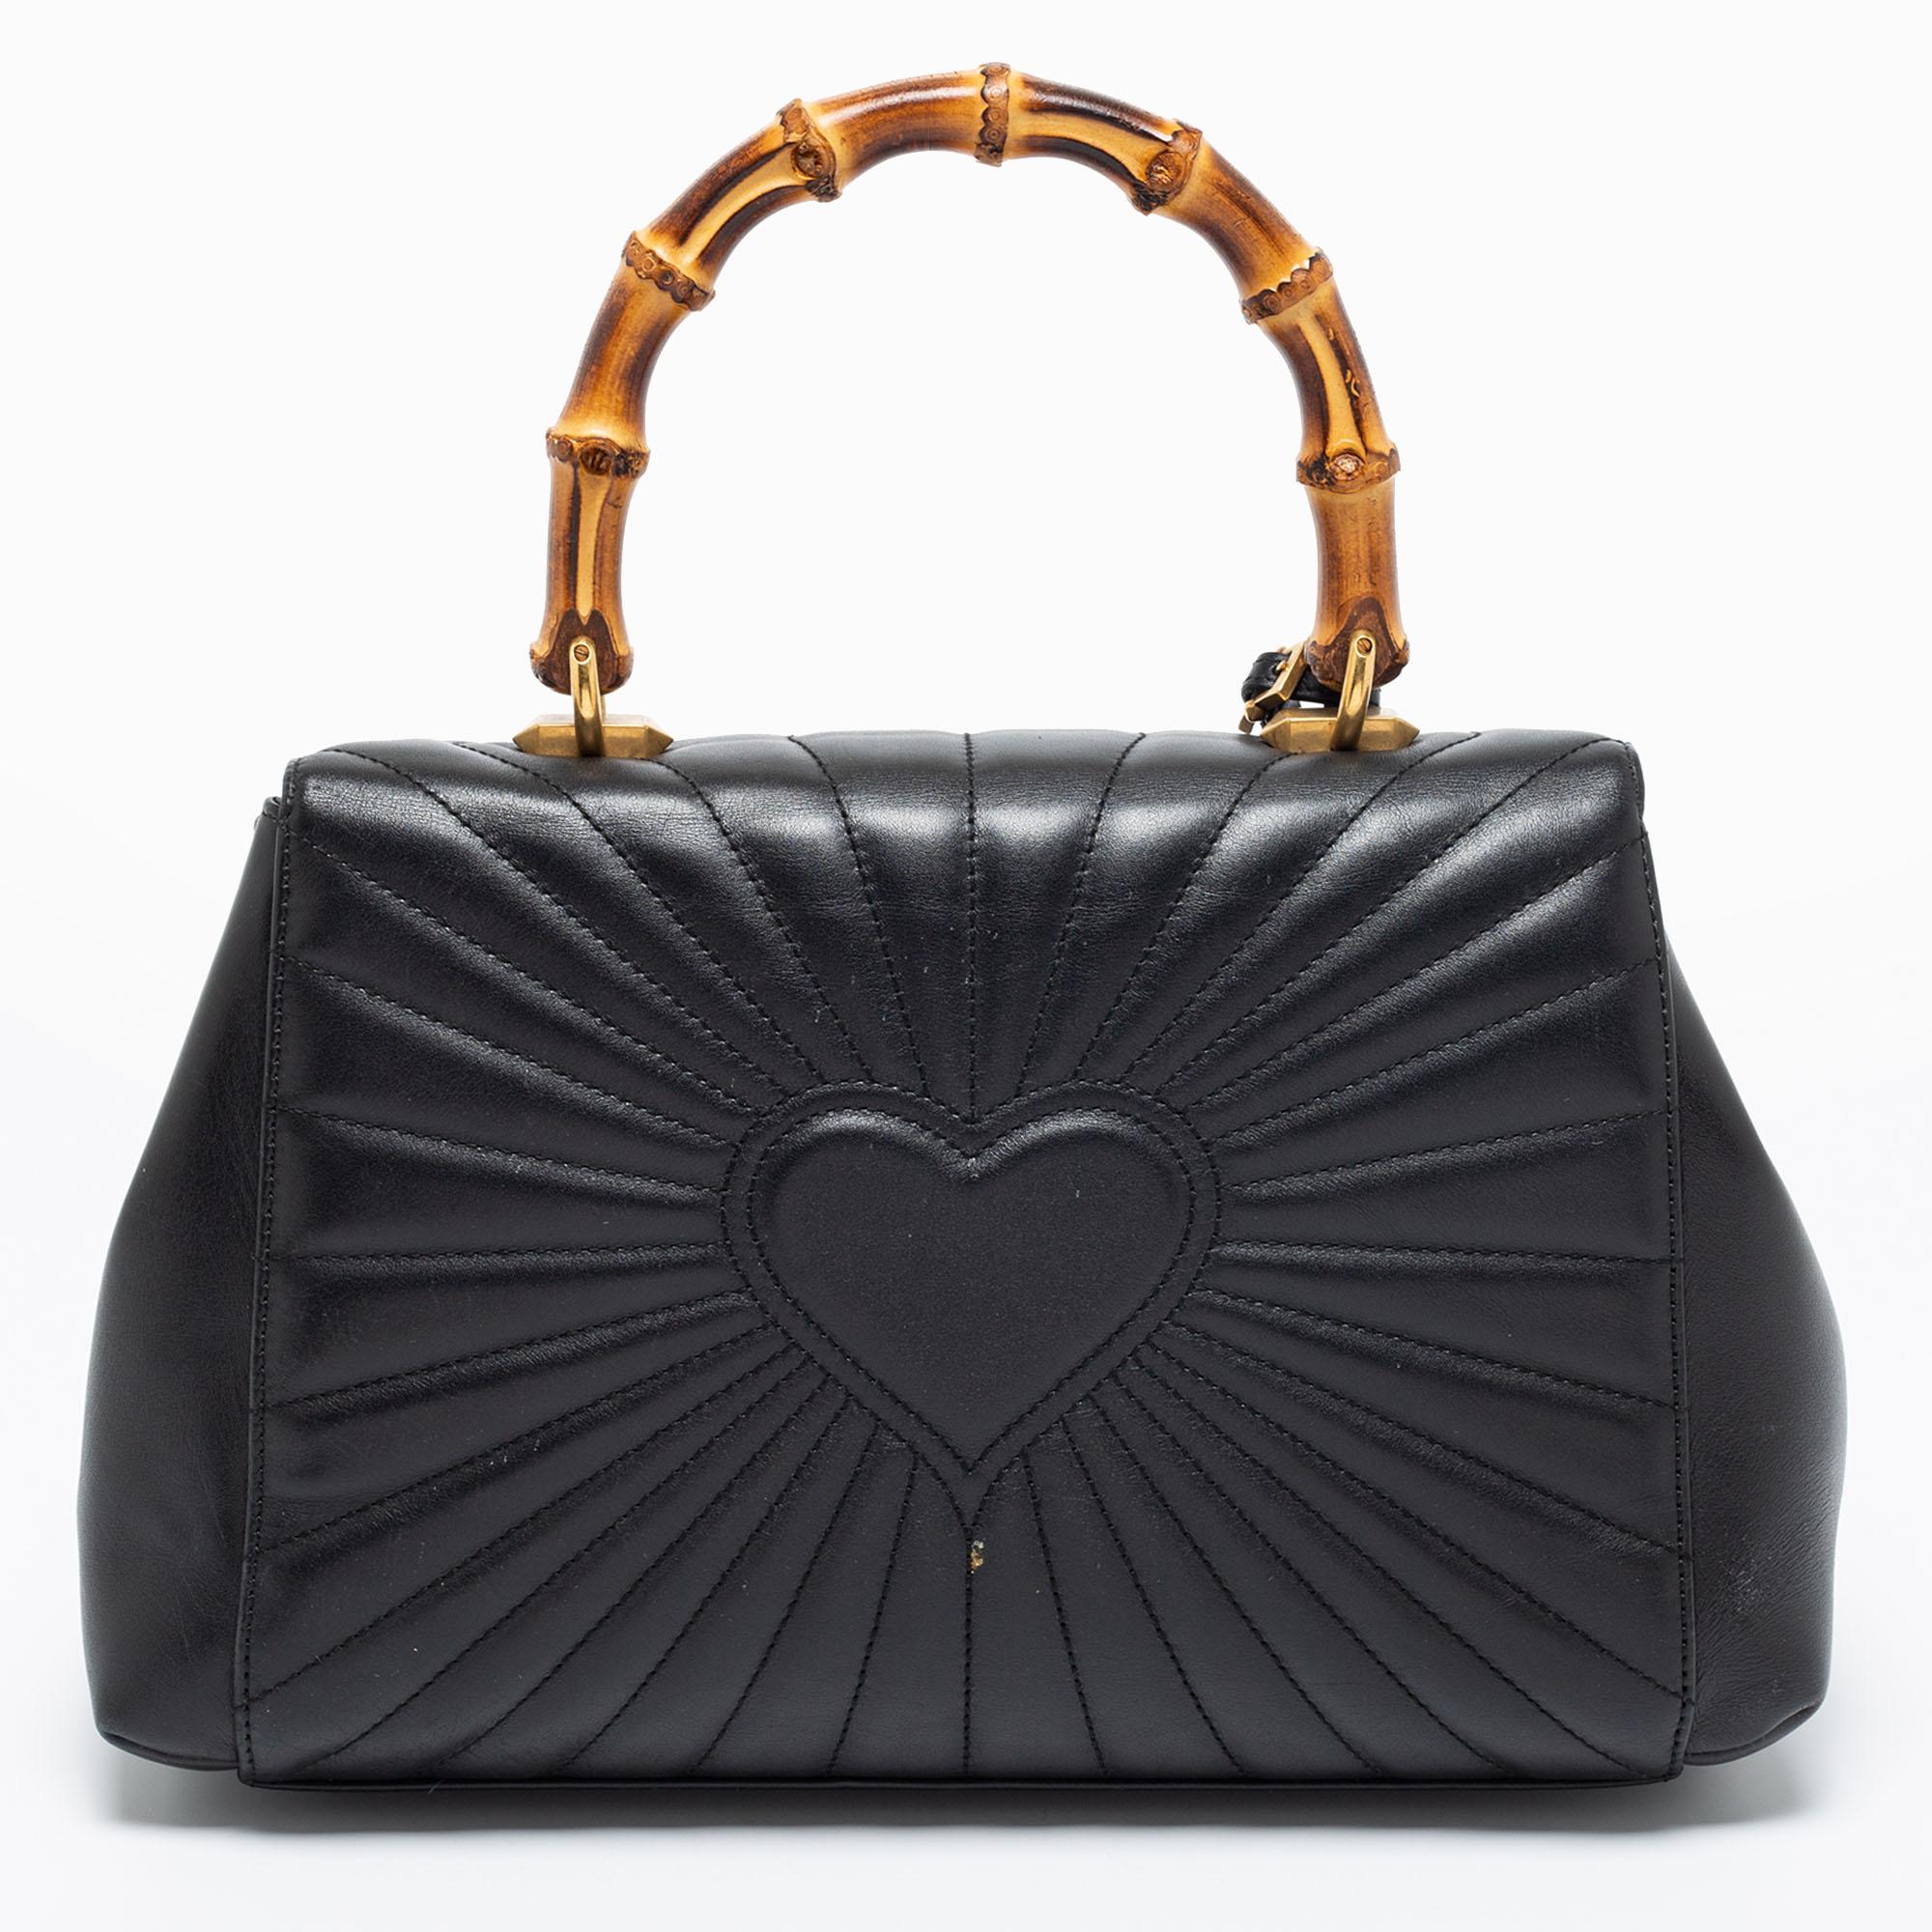 Coming from Gucci, this impeccable Queen Margaret bag is a luxurious piece you need to own today. It is made from black quilted leather, with the iconic Bamboo handle perched on the top. Encrusted with a studded Bee motif, it flaunts gold-toned